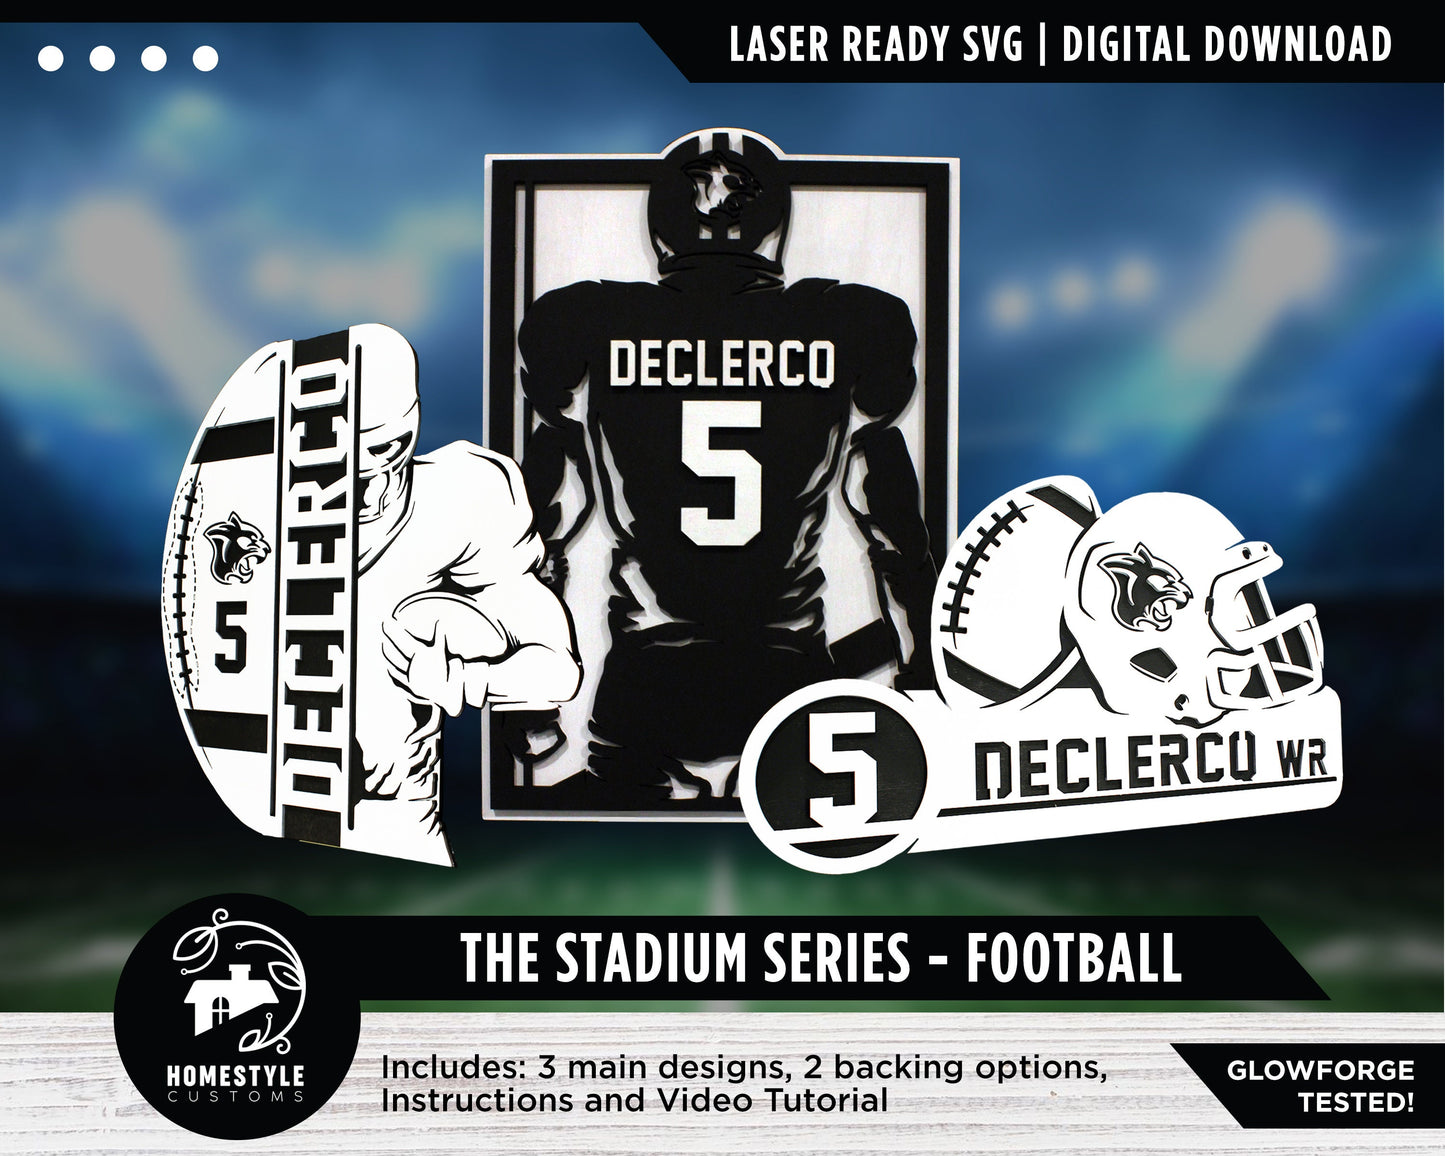 Stadium Series Football Signage - 3 Designs Included and two backing options - SVG File Download - Sized for Glowforge